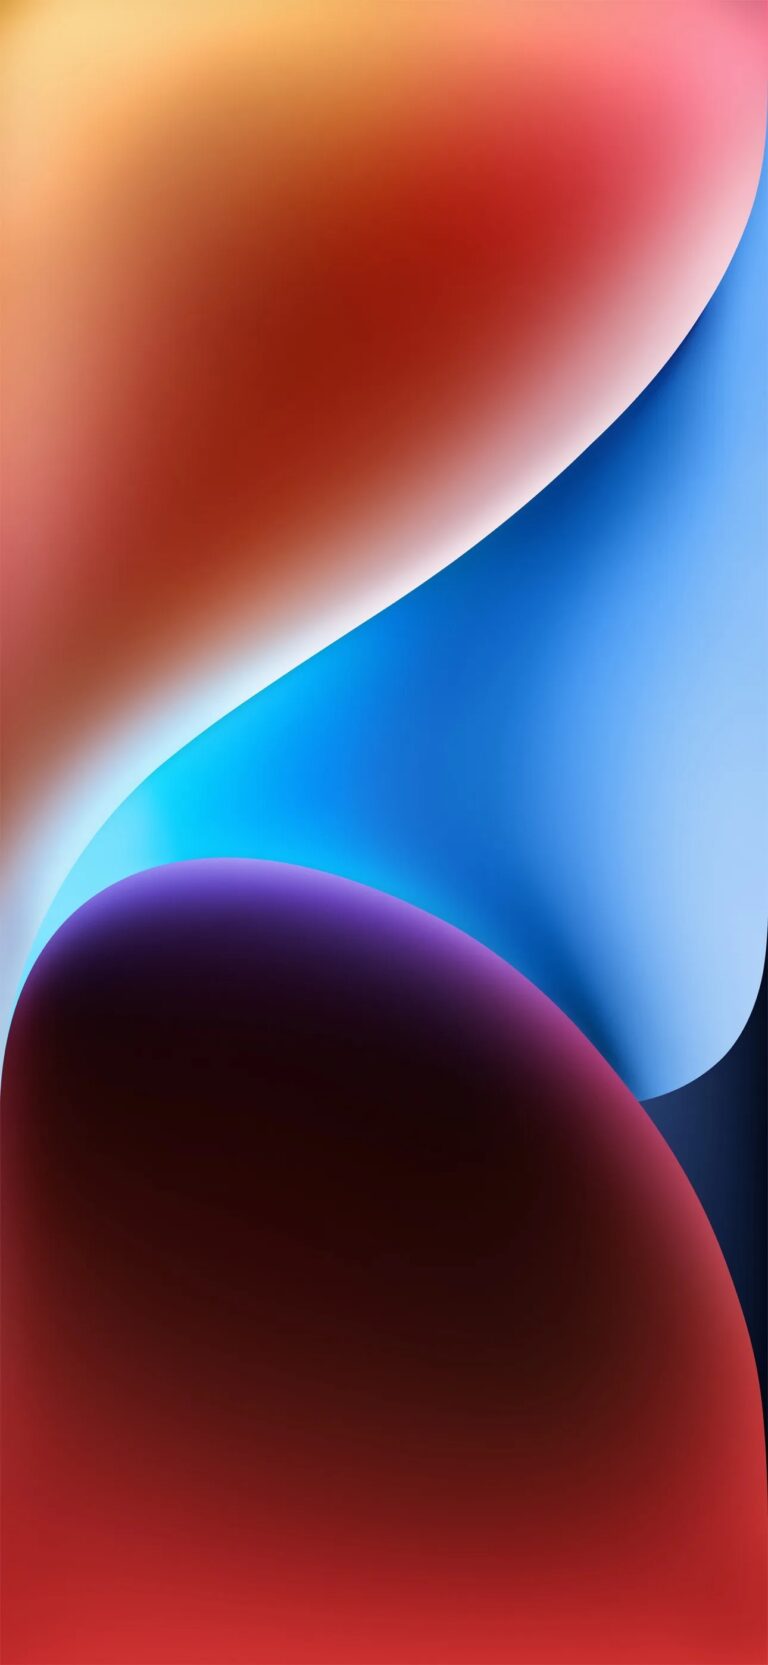 Grab the iPhone 14 Pro & iPhone 14 Wallpapers Now